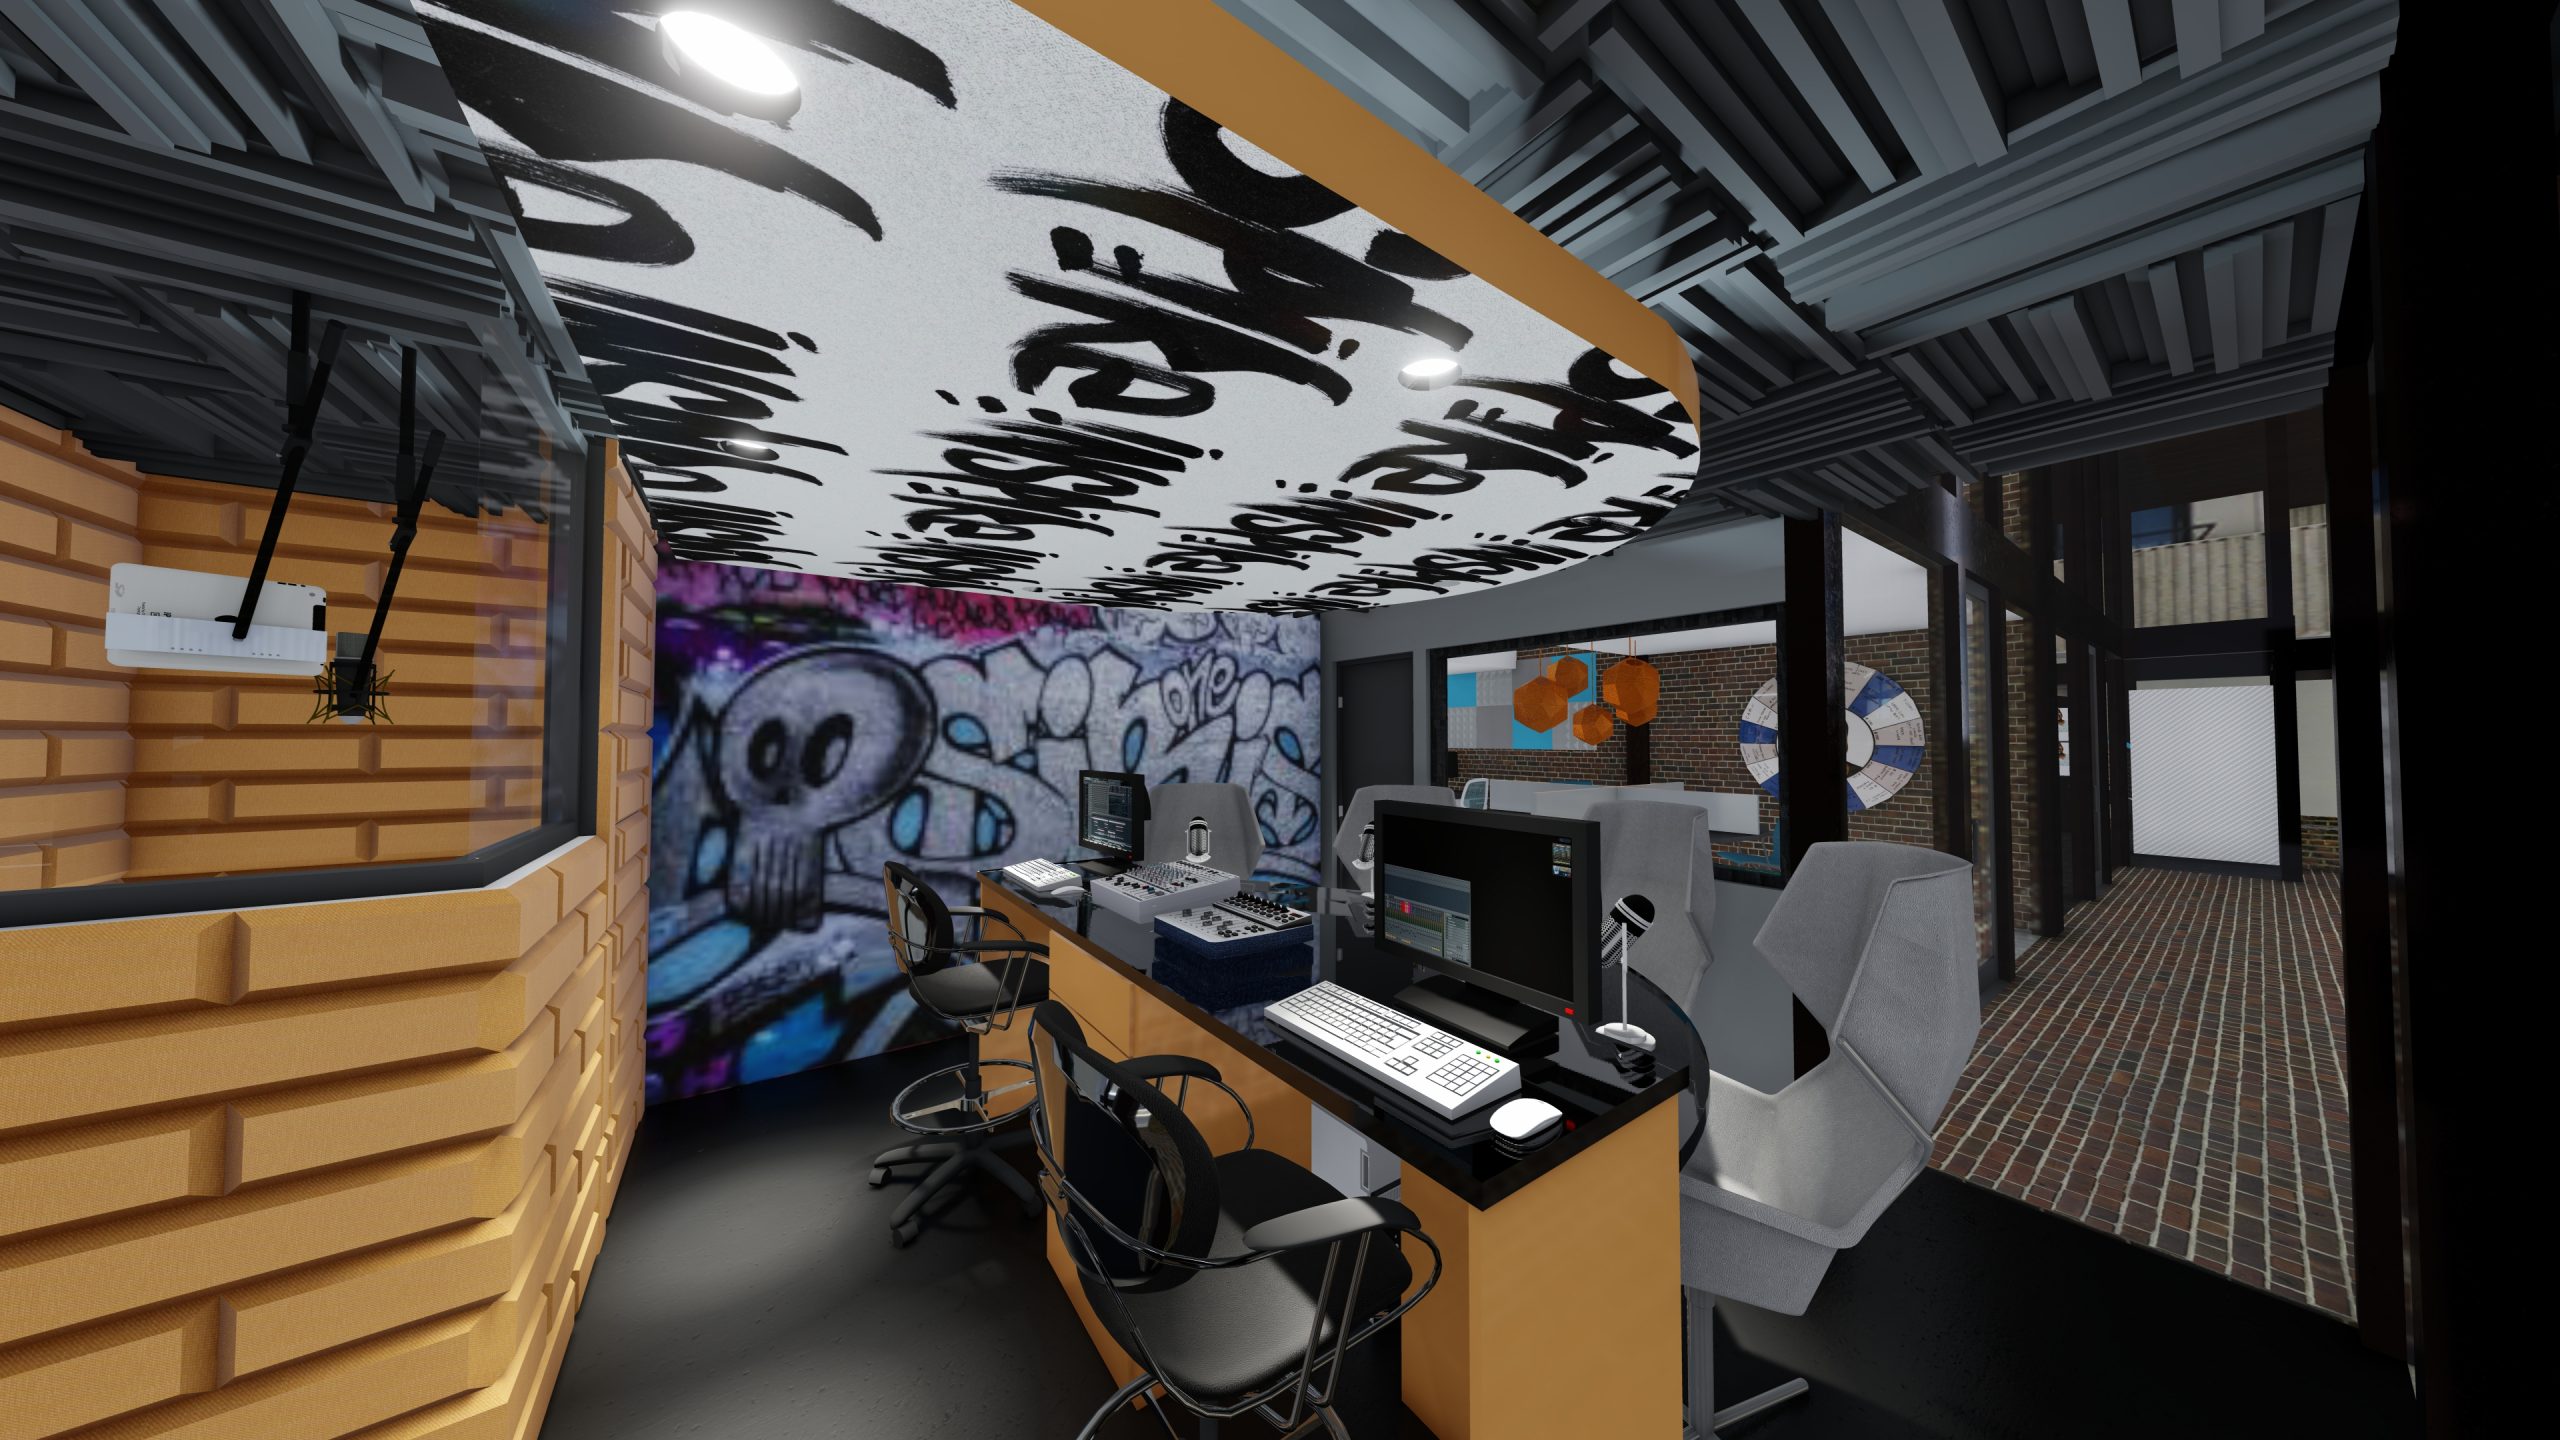 A podcast studio with a solid gold brick recording studio and graffiti artwork on the walls and ceiling